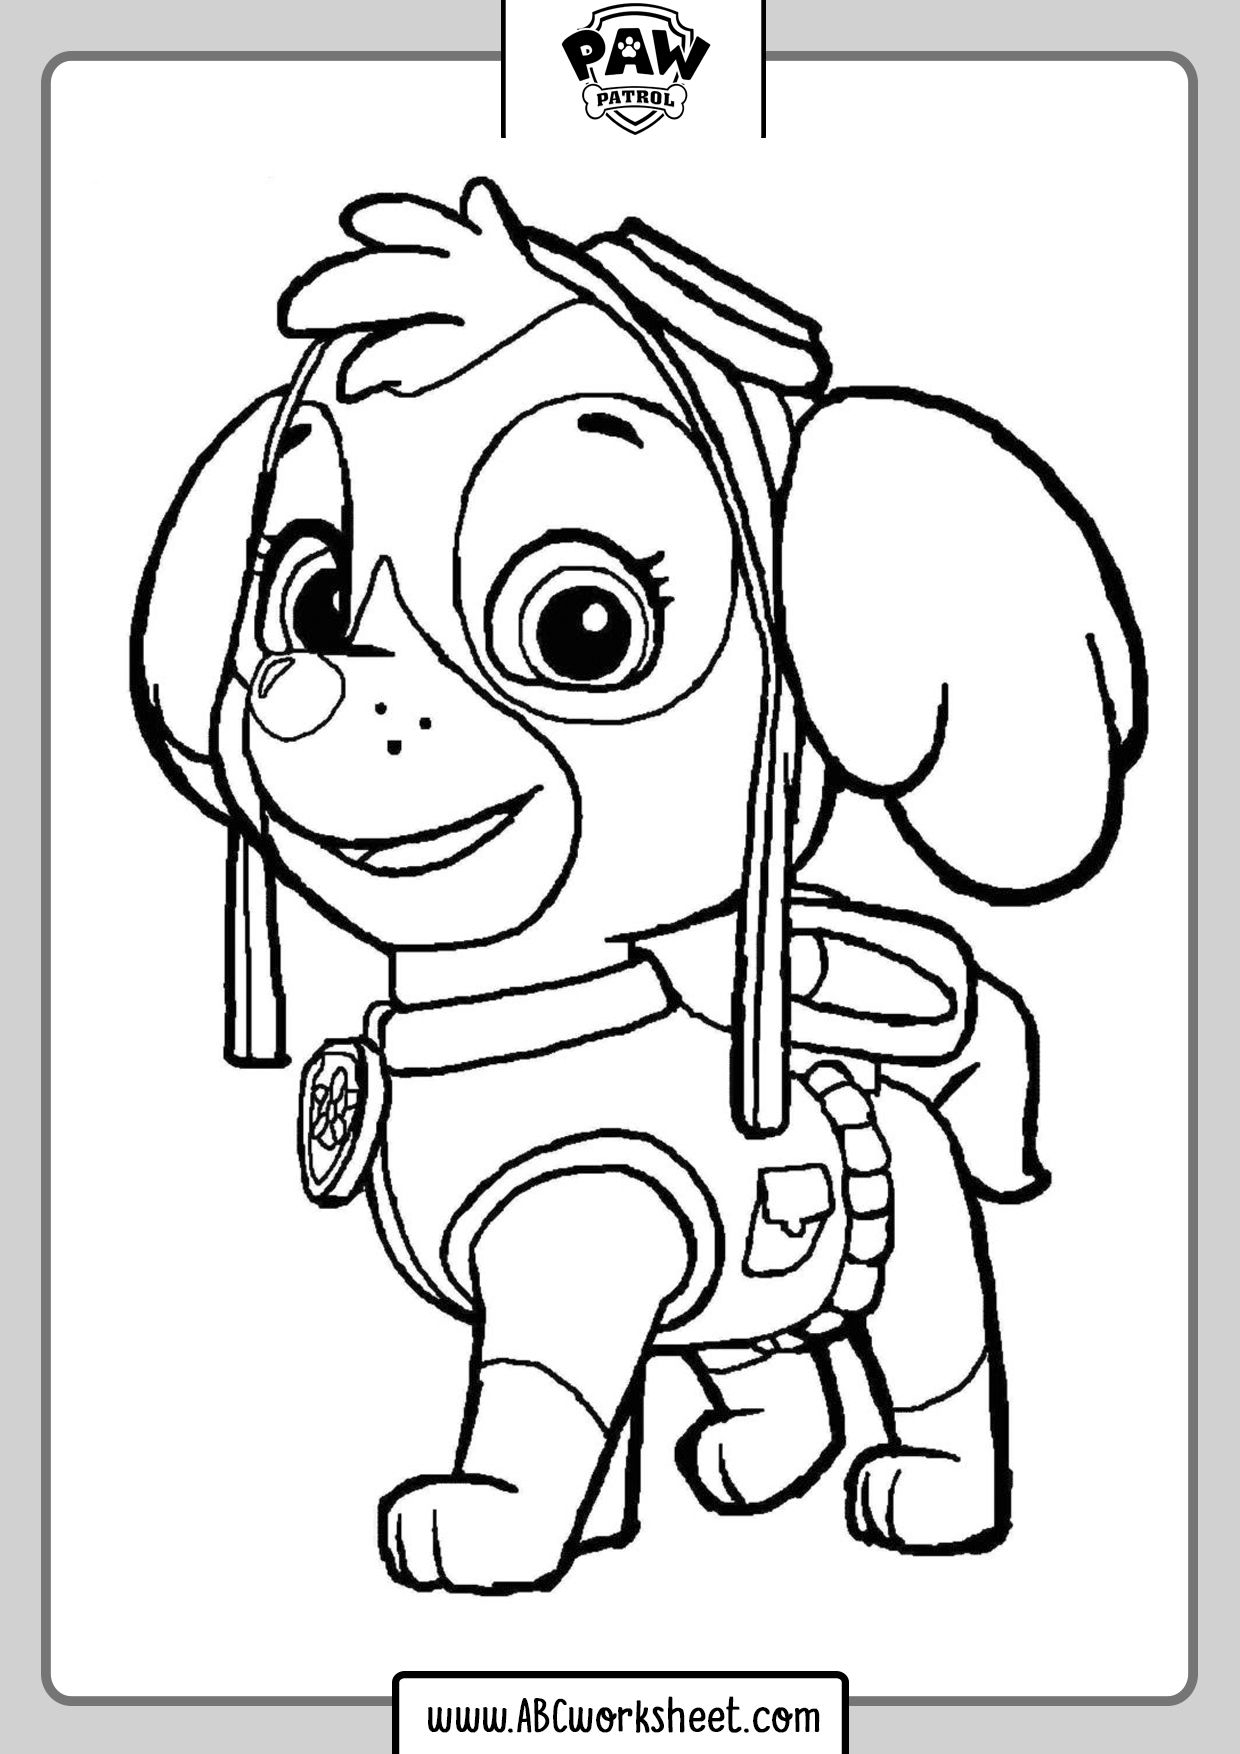 Paw Patrol Coloring Pages FREE Printable 50